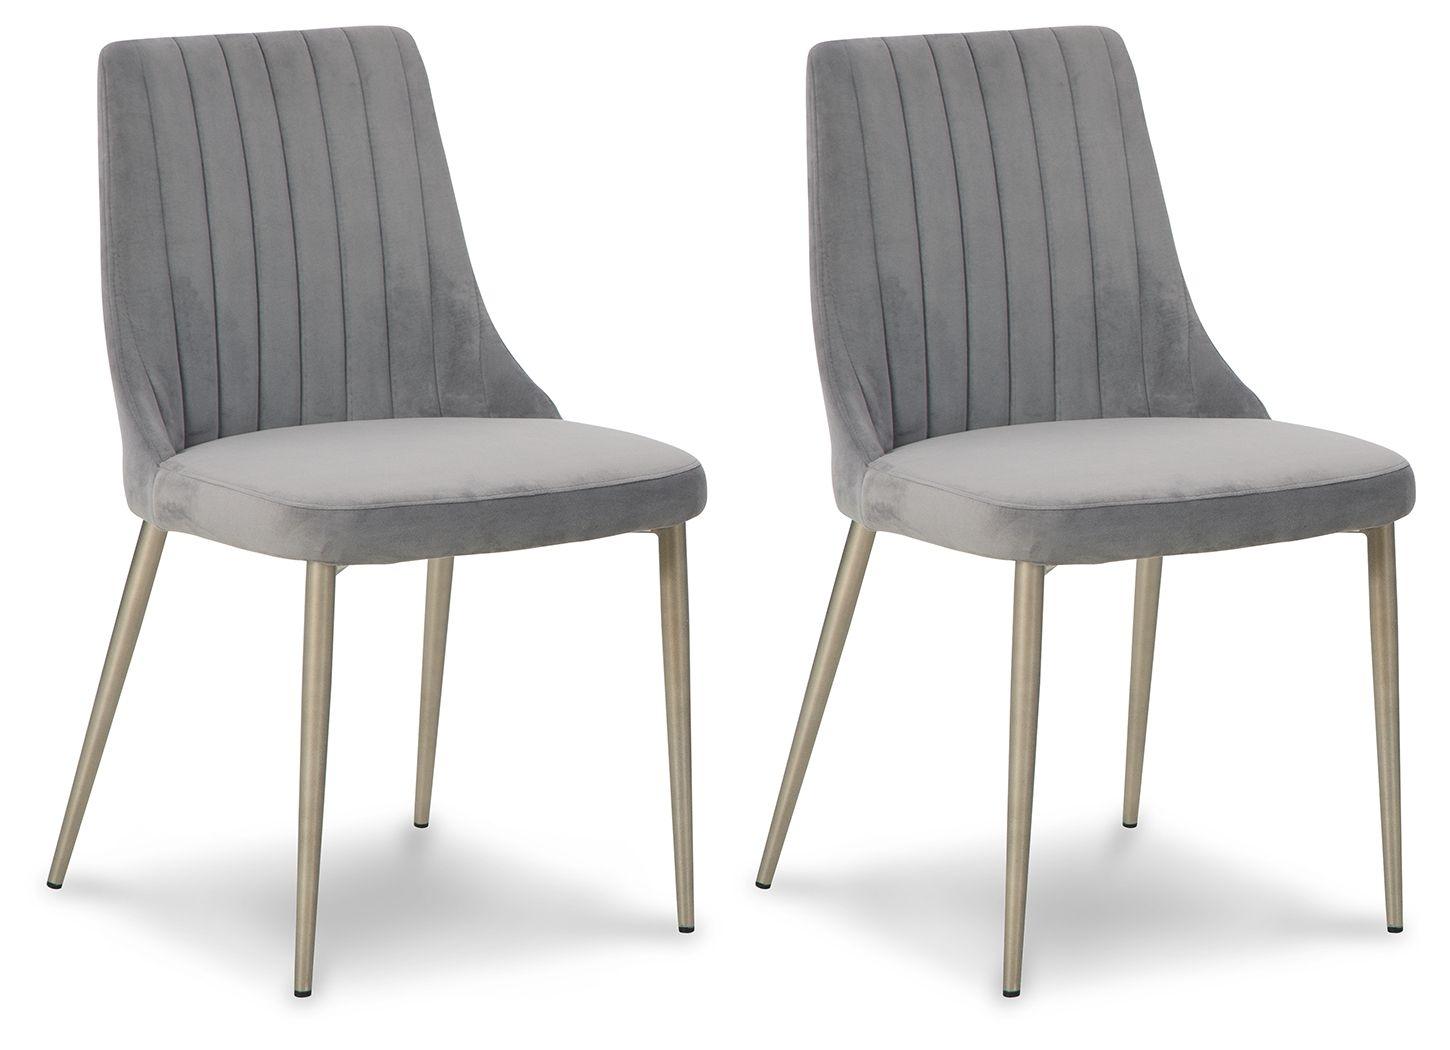 Signature Design by Ashley® - Barchoni - Gray - Dining Uph Side Chair (Set of 2) - 5th Avenue Furniture